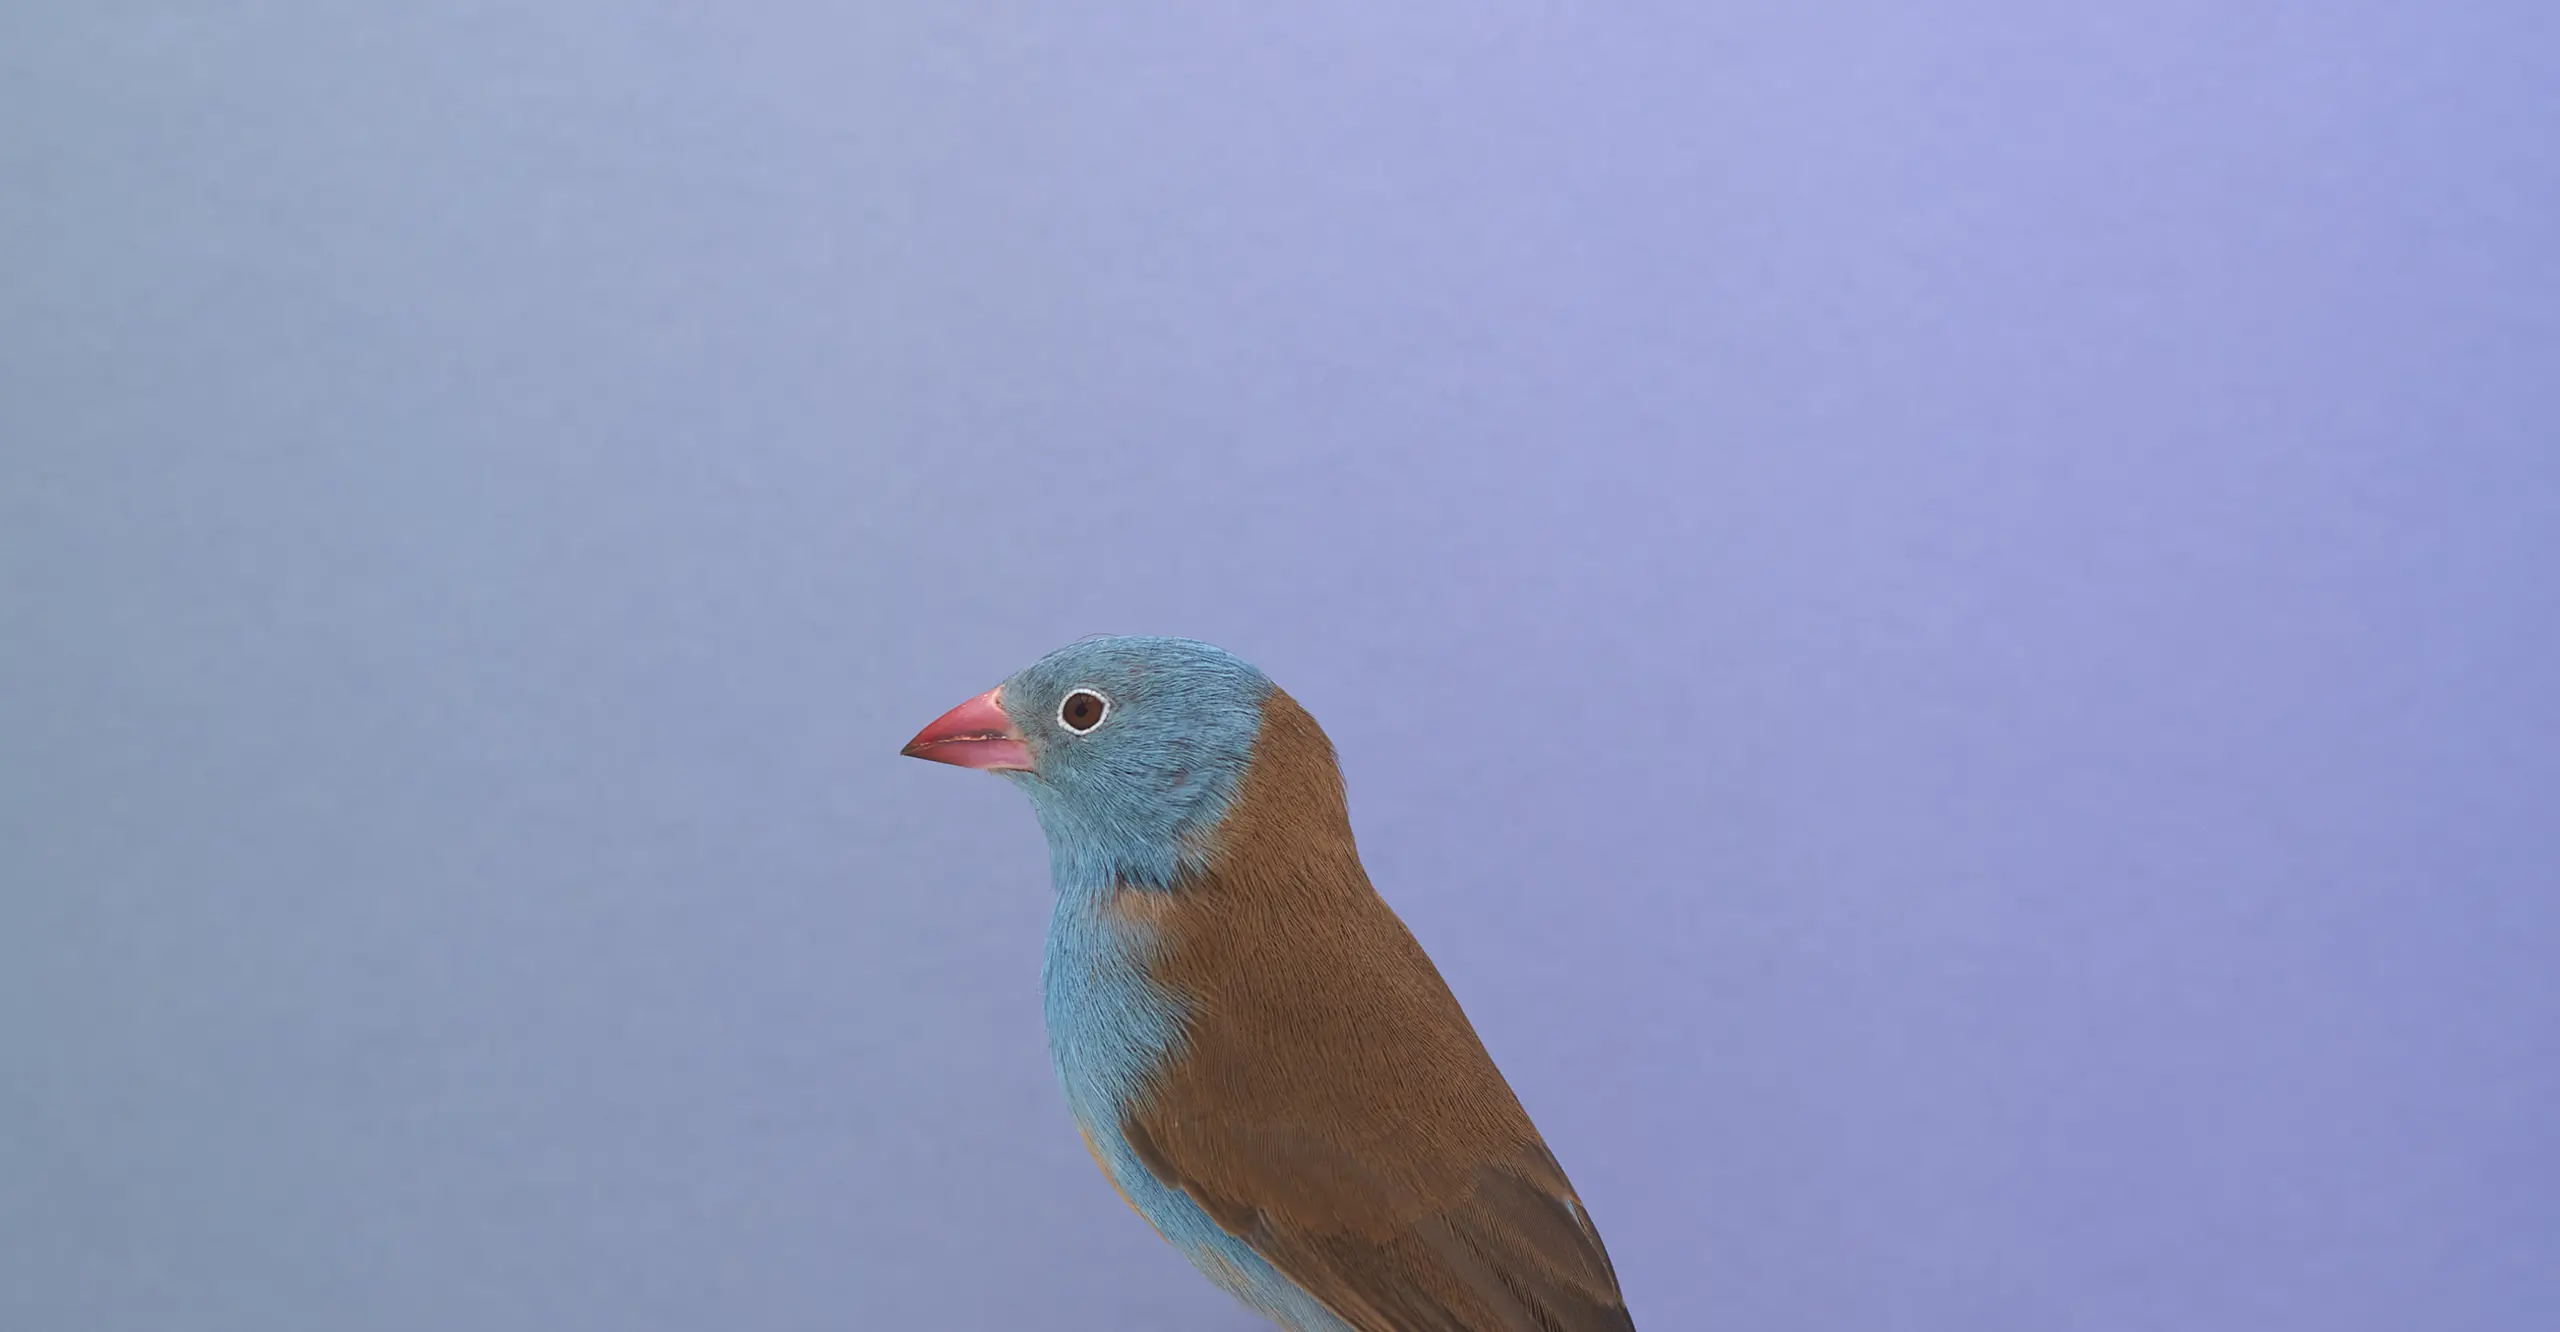 Blue Cap Waxbill © Luke Stephenson Courtesy of the artist and The Photographers’ Gallery